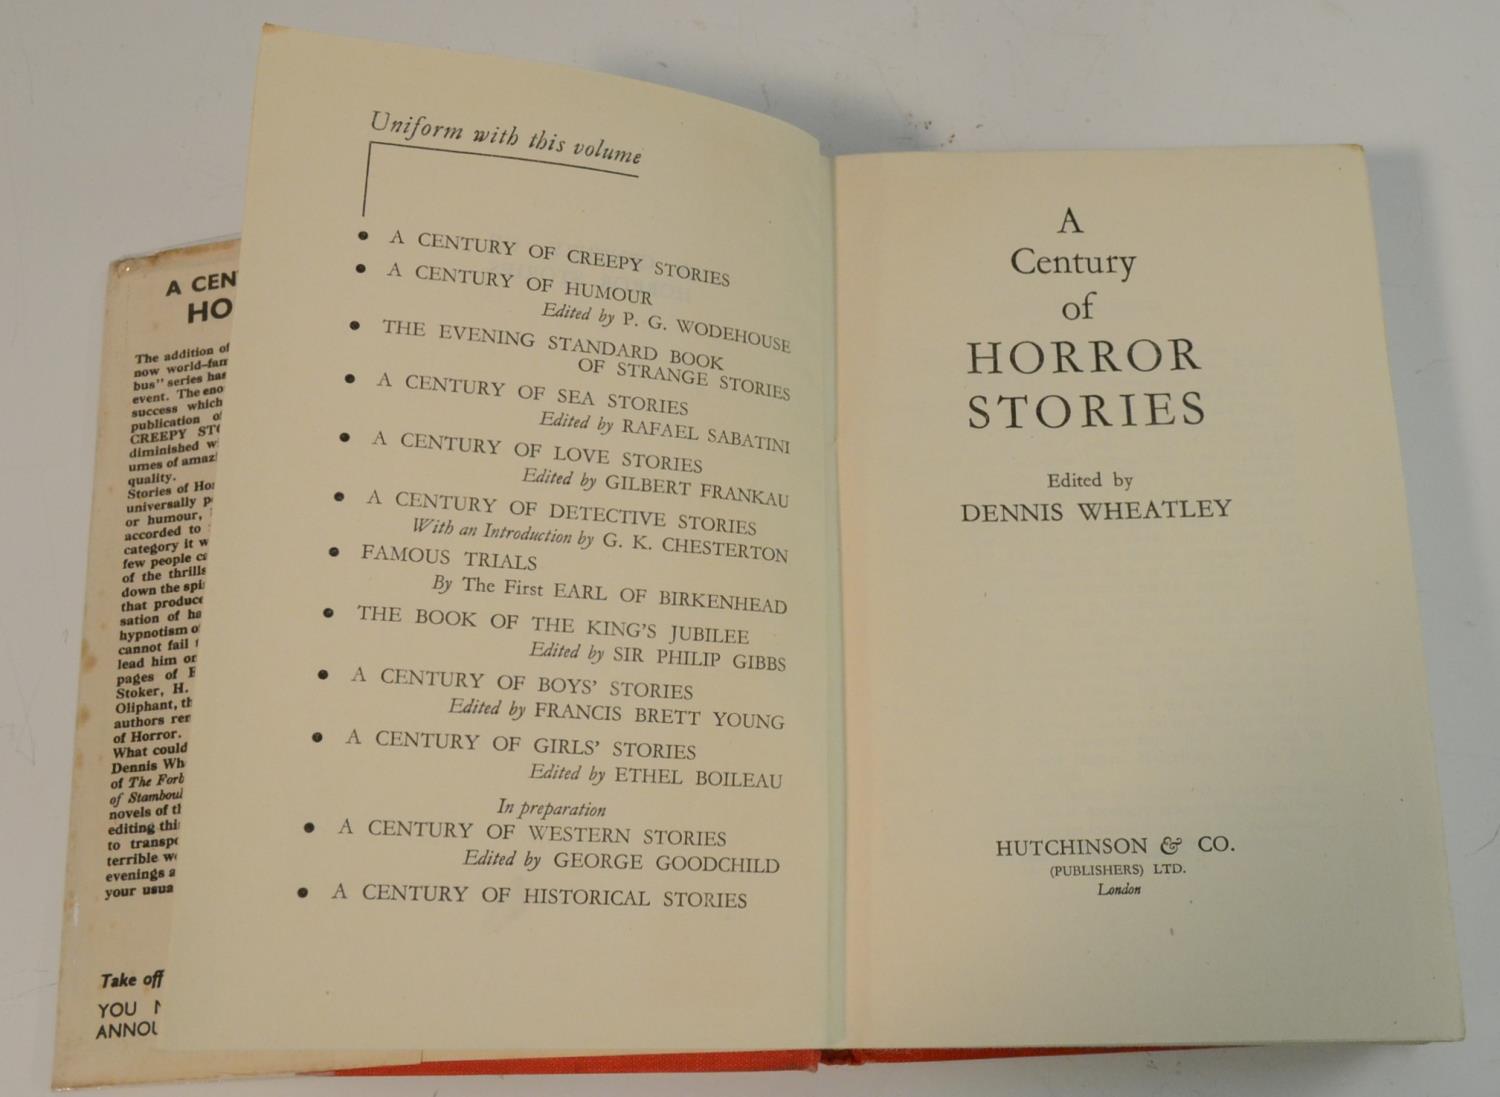 Wheatley (Dennis, editor), A Century of Horror Stories, first edition thus, London: Hutchinson & Co. - Image 3 of 3